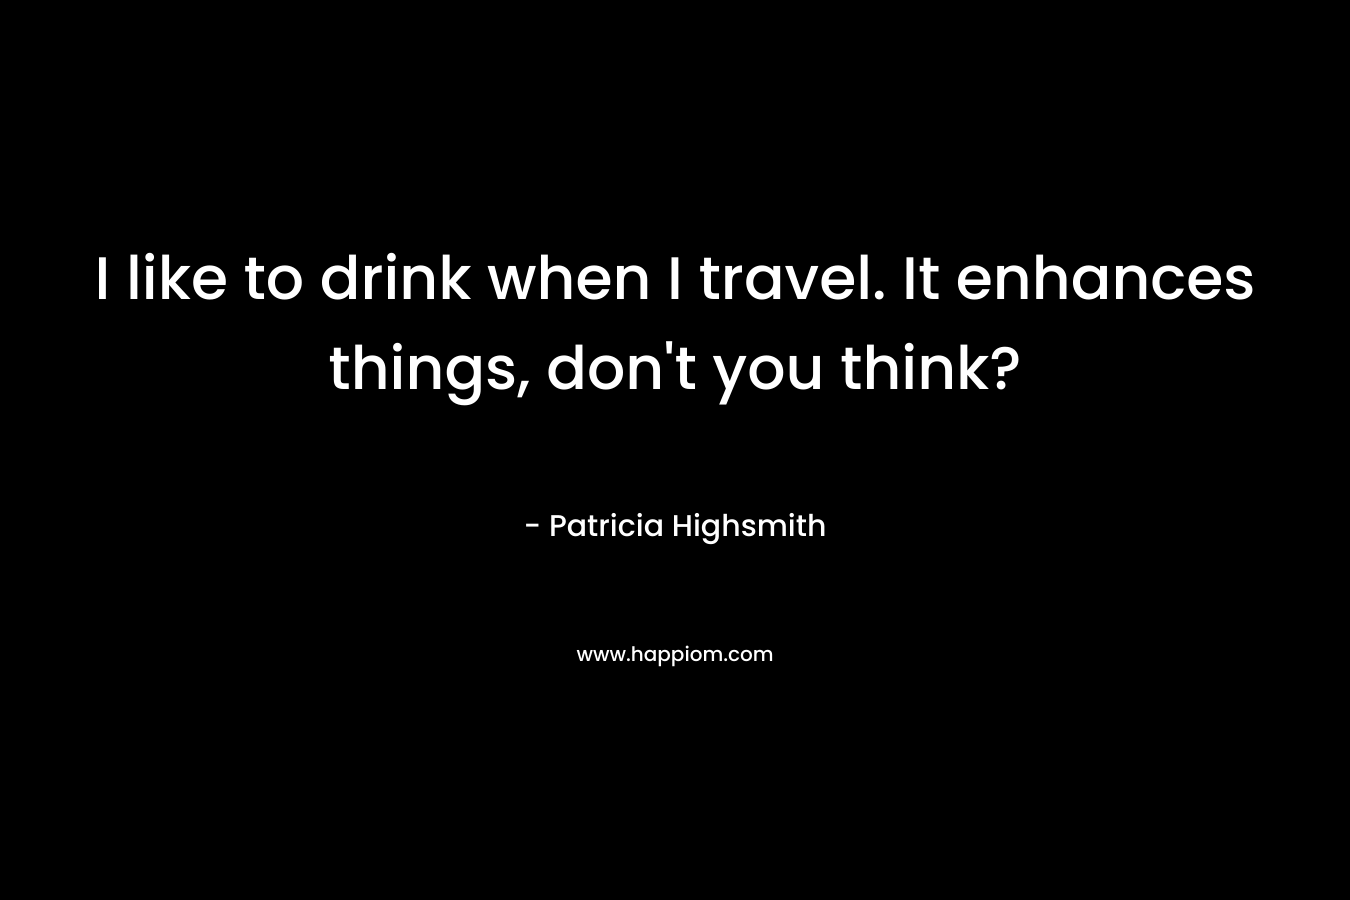 I like to drink when I travel. It enhances things, don’t you think? – Patricia Highsmith